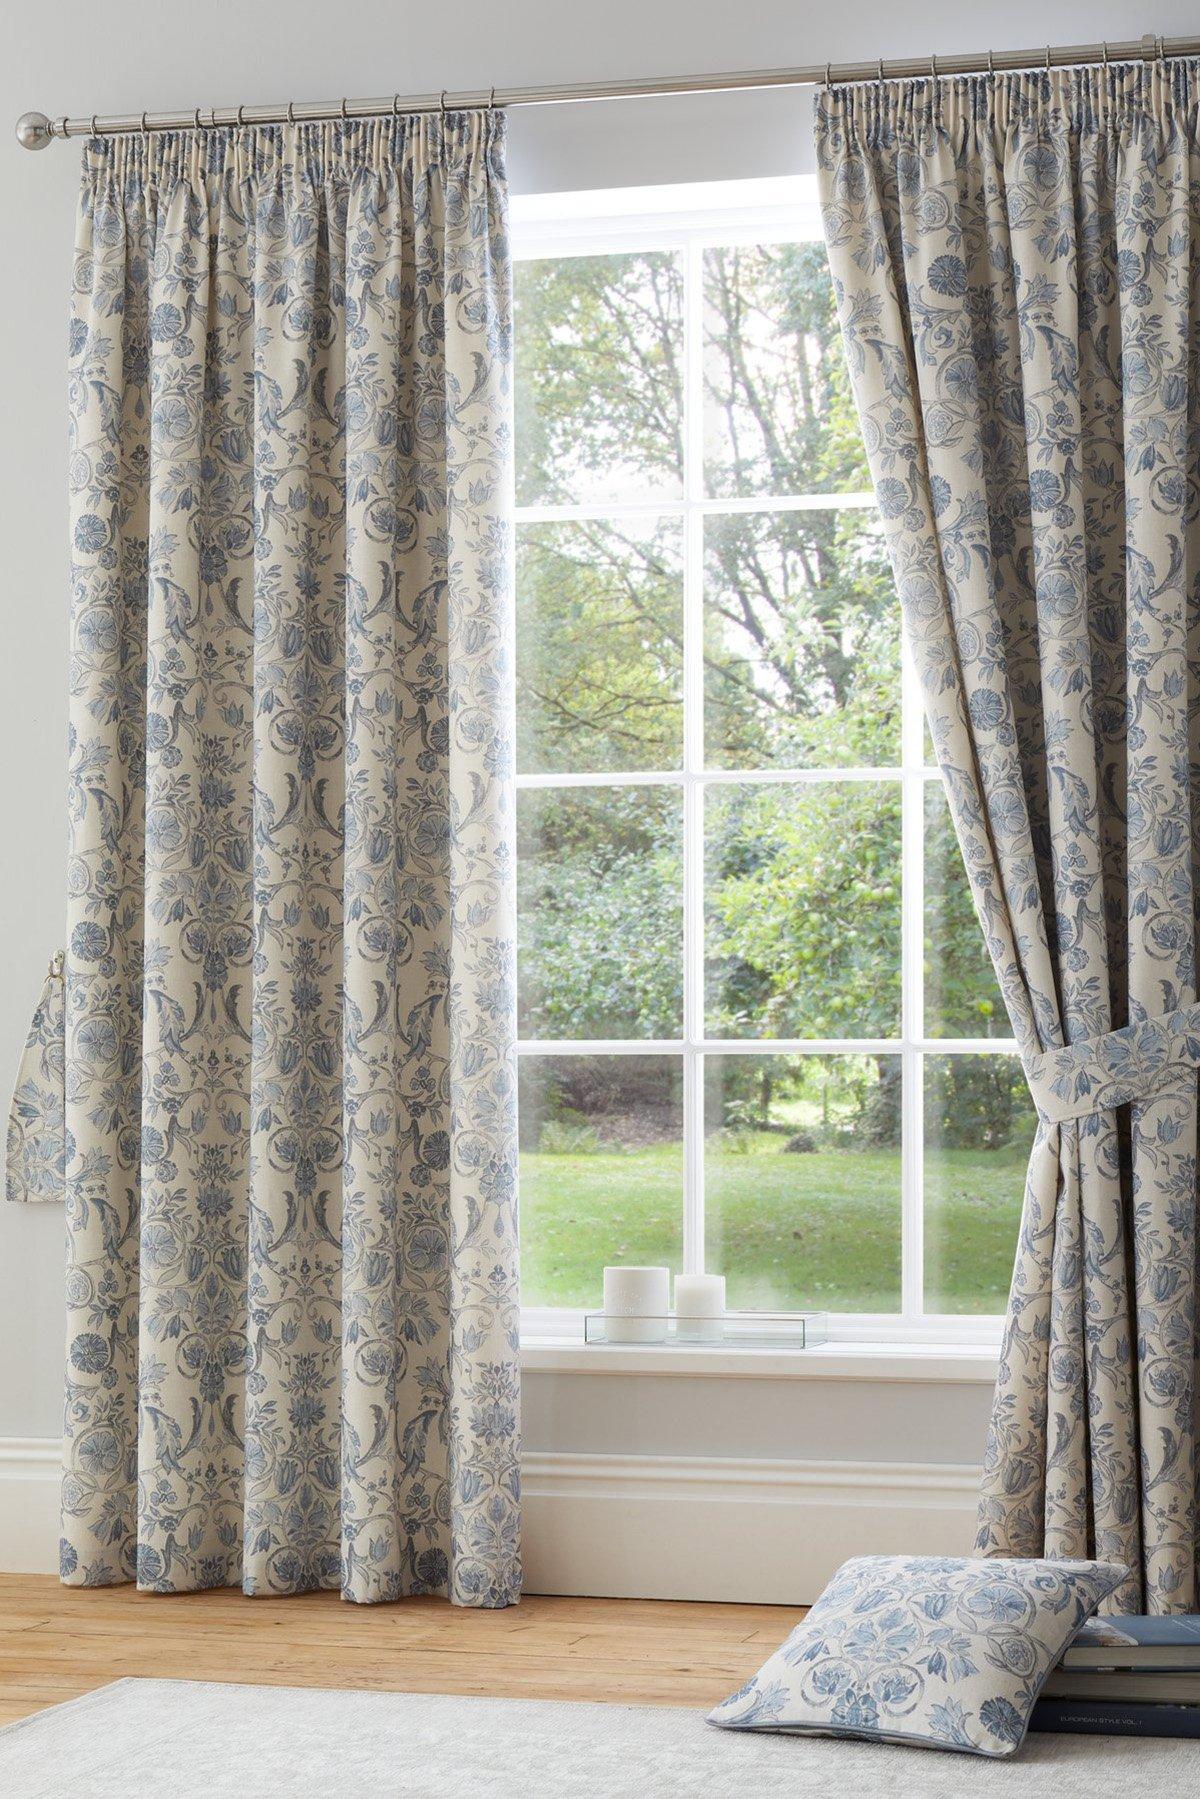 'Averie' Pair of Pencil Pleat Curtains With Tie-Backs